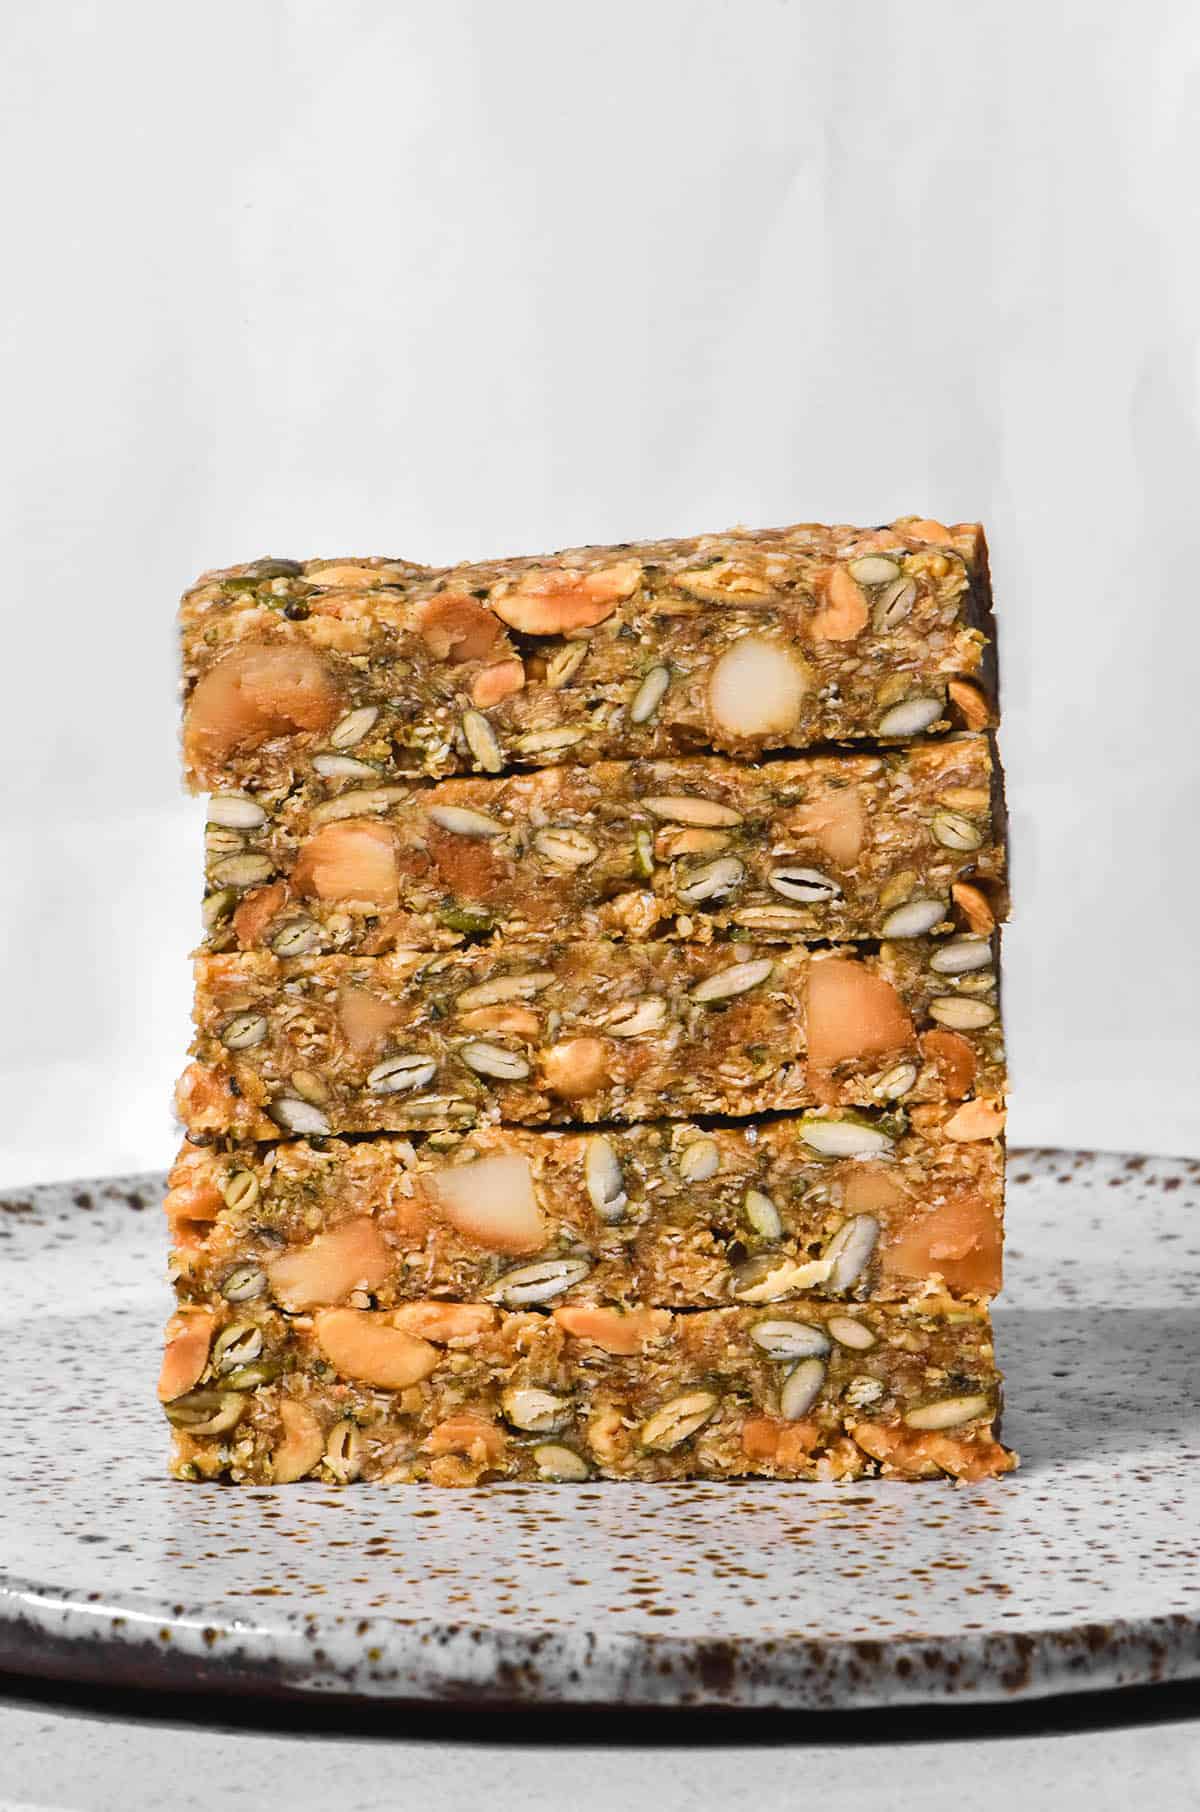 A brightly lit aerial image of a stack of low FODMAP granola bars on a white speckled ceramic plate against a white backdrop